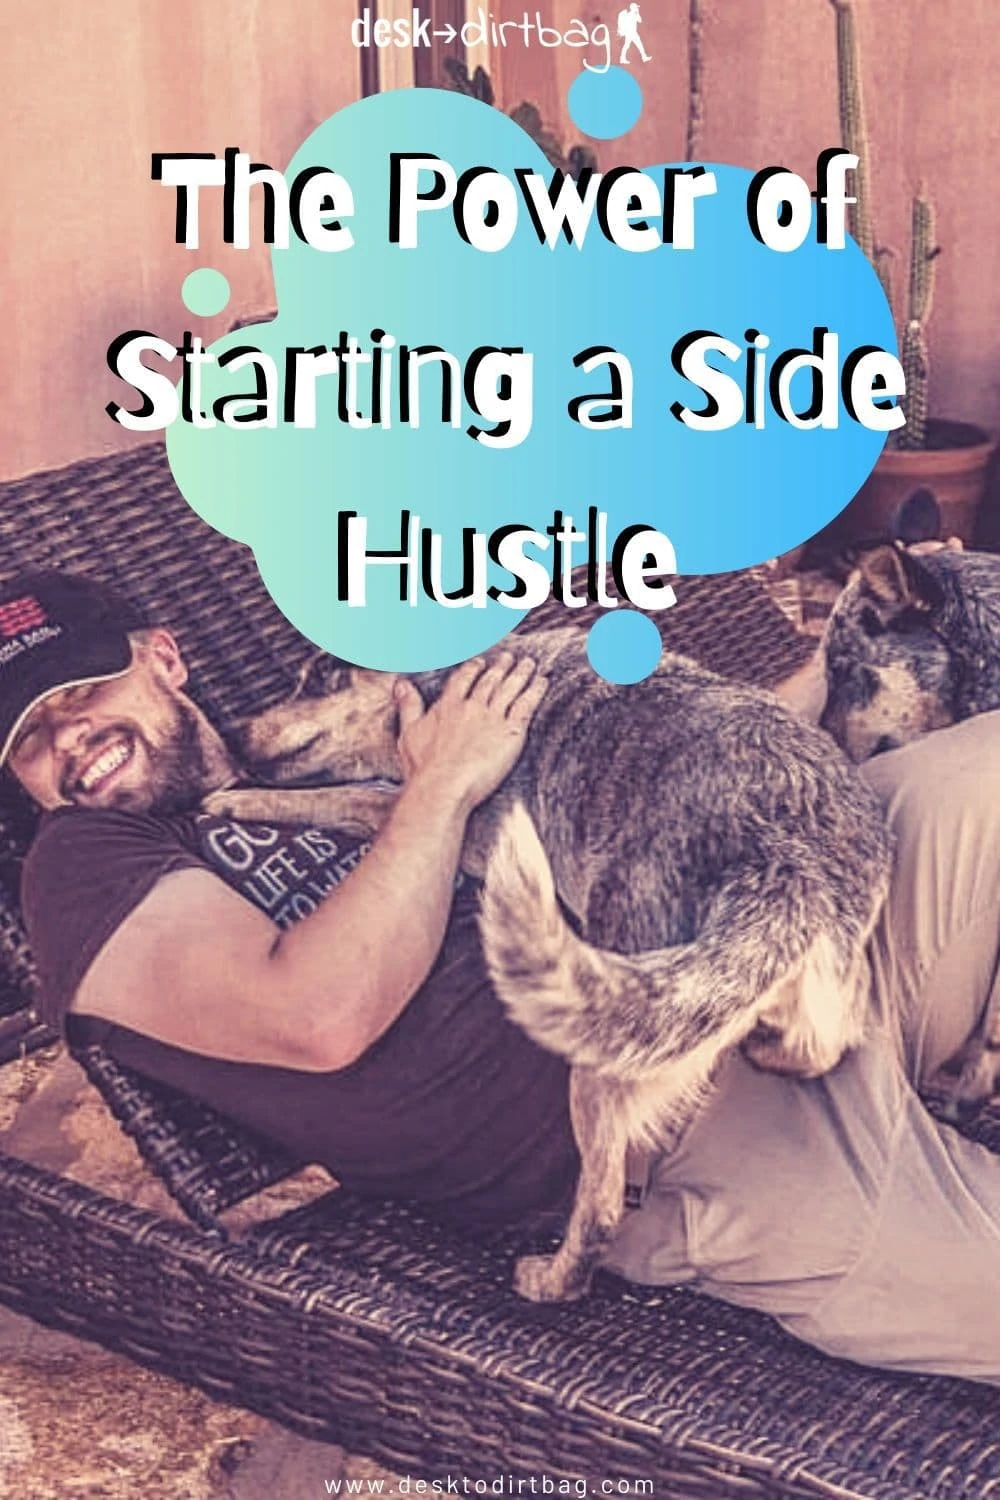 The Power of Starting a Side Hustle (Work Online While Traveling) freelancing